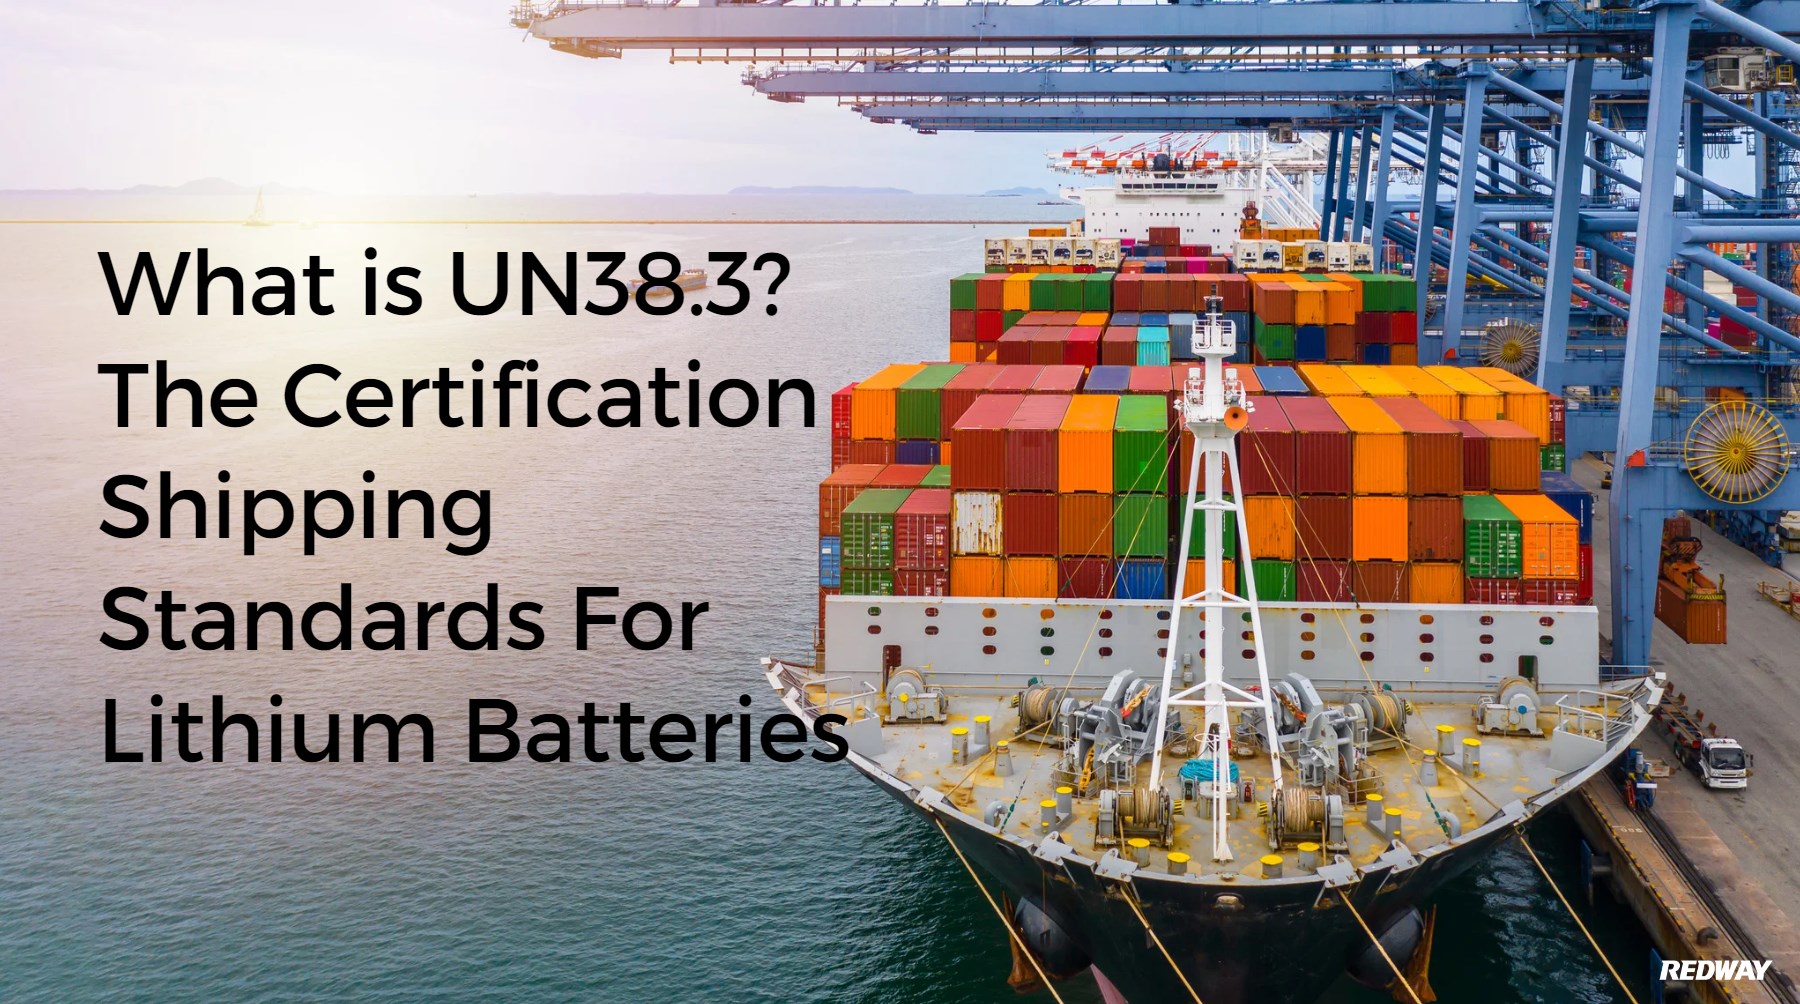 What is UN38.3? The Certification Shipping Standards For Lithium Batteries